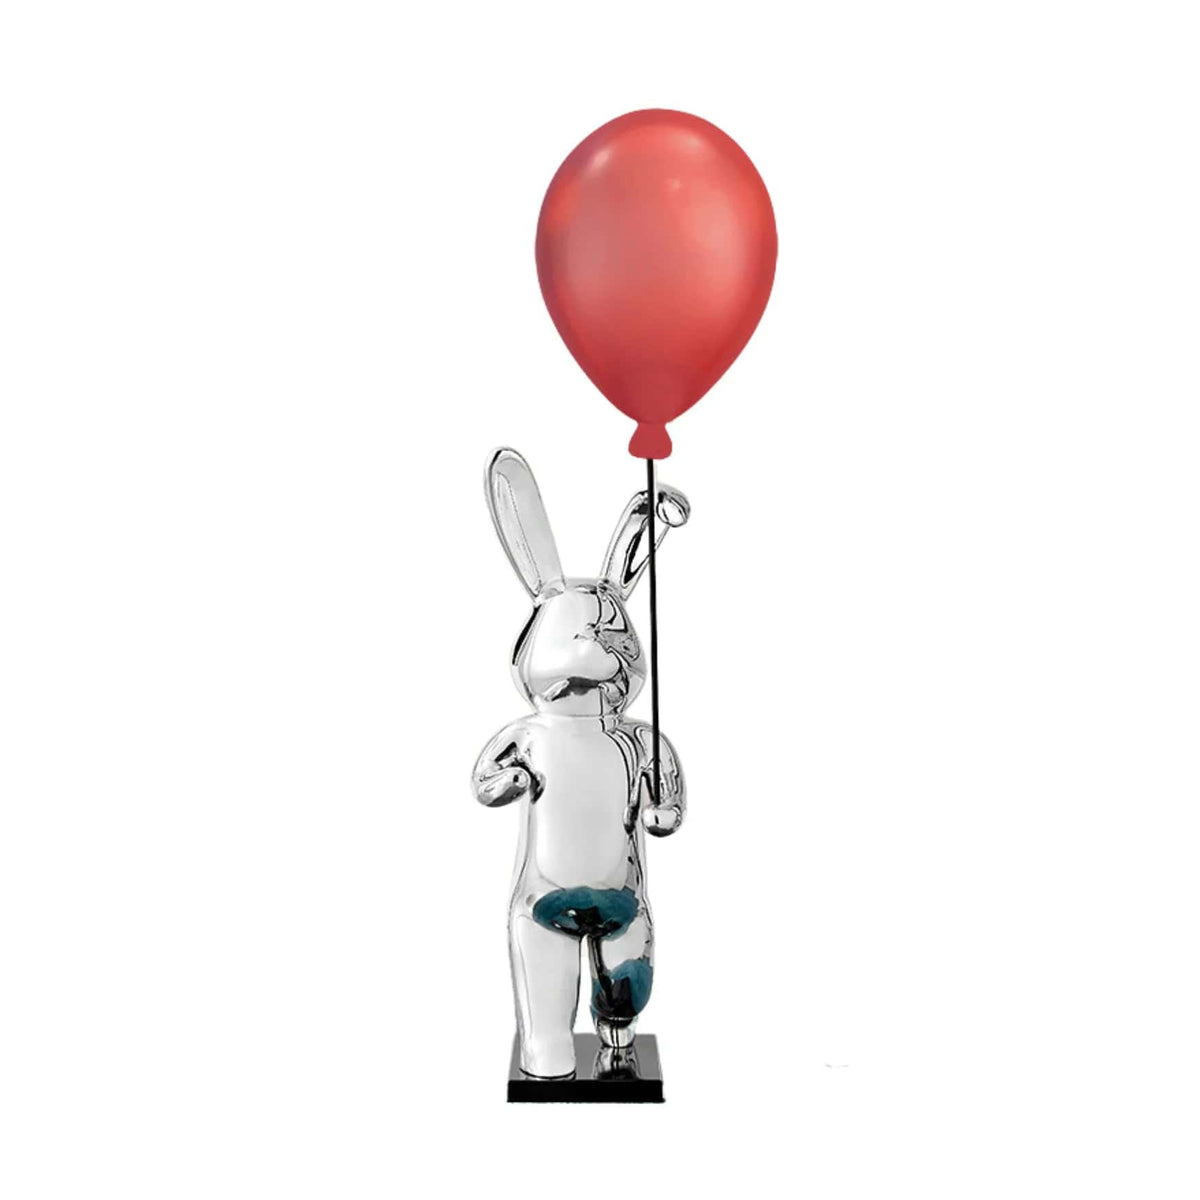 Chrome Bunny Floor Sculpture with Red Balloon